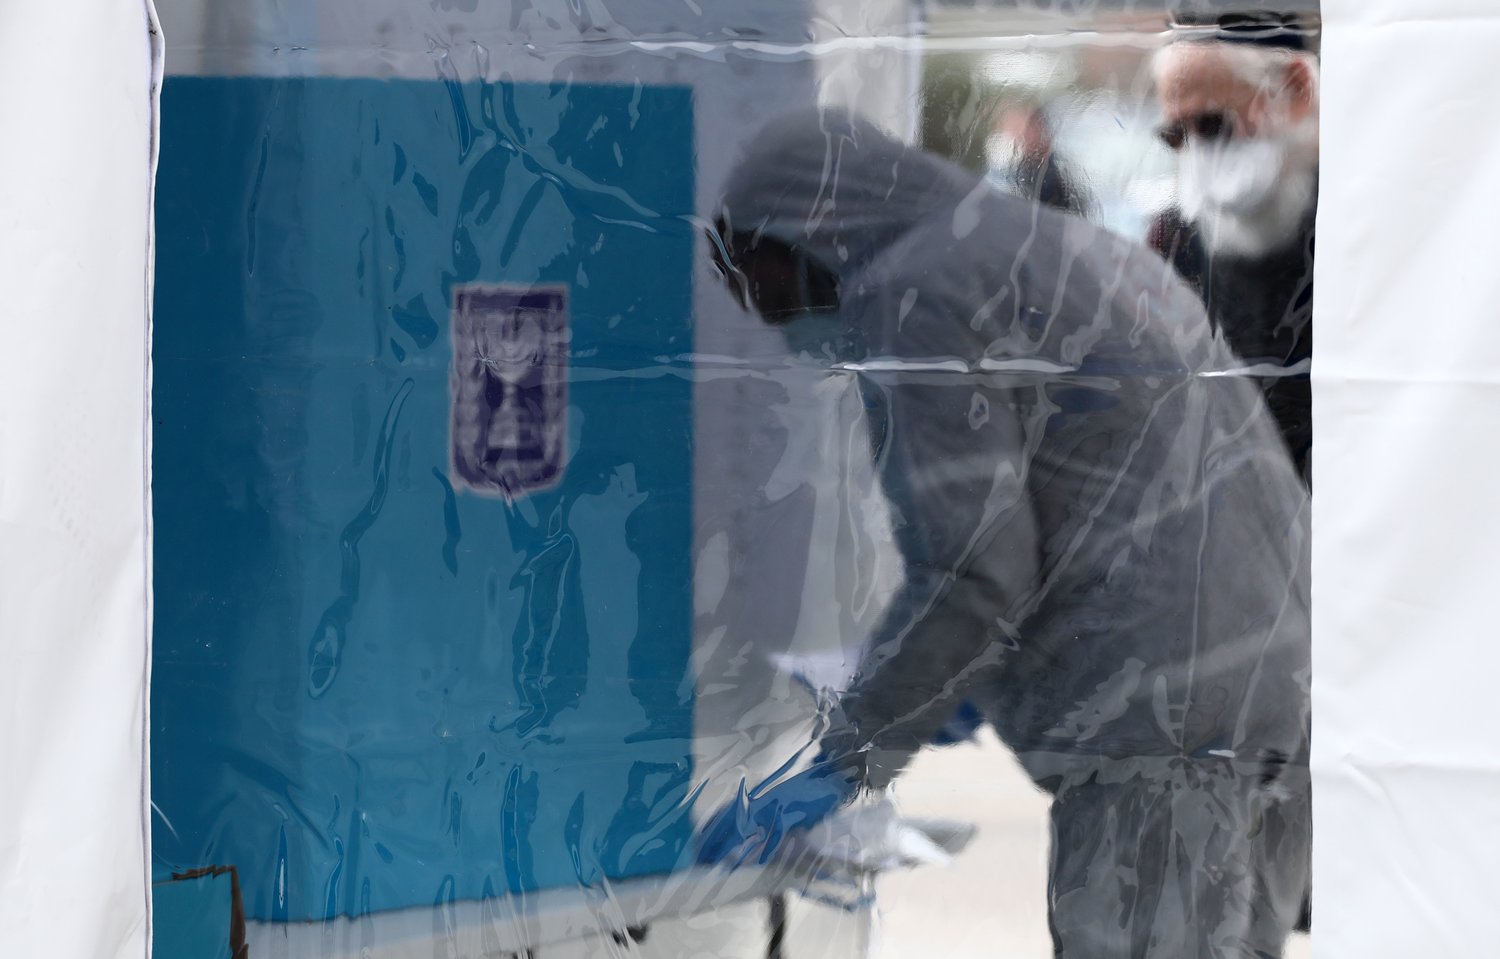 A member of Israel's Maguen David Adom (National Emergency Pre-Hospital Medical Organisation) works at a polling booth specially erected for the 5,600 voters under quarantine, many of whom visited countries where the coronavirus COVID-19 is prevalent, during parliamentary election on March 2, 2020 in Jerusalem. - Israelis were voting for a third time in 12 months today, with embattled Prime Minister Benjamin Netanyahu seeking to end the country's political crisis and save his career. (Photo by Gali TIBBON / AFP) (Photo by GALI TIBBON/AFP via Getty Images)